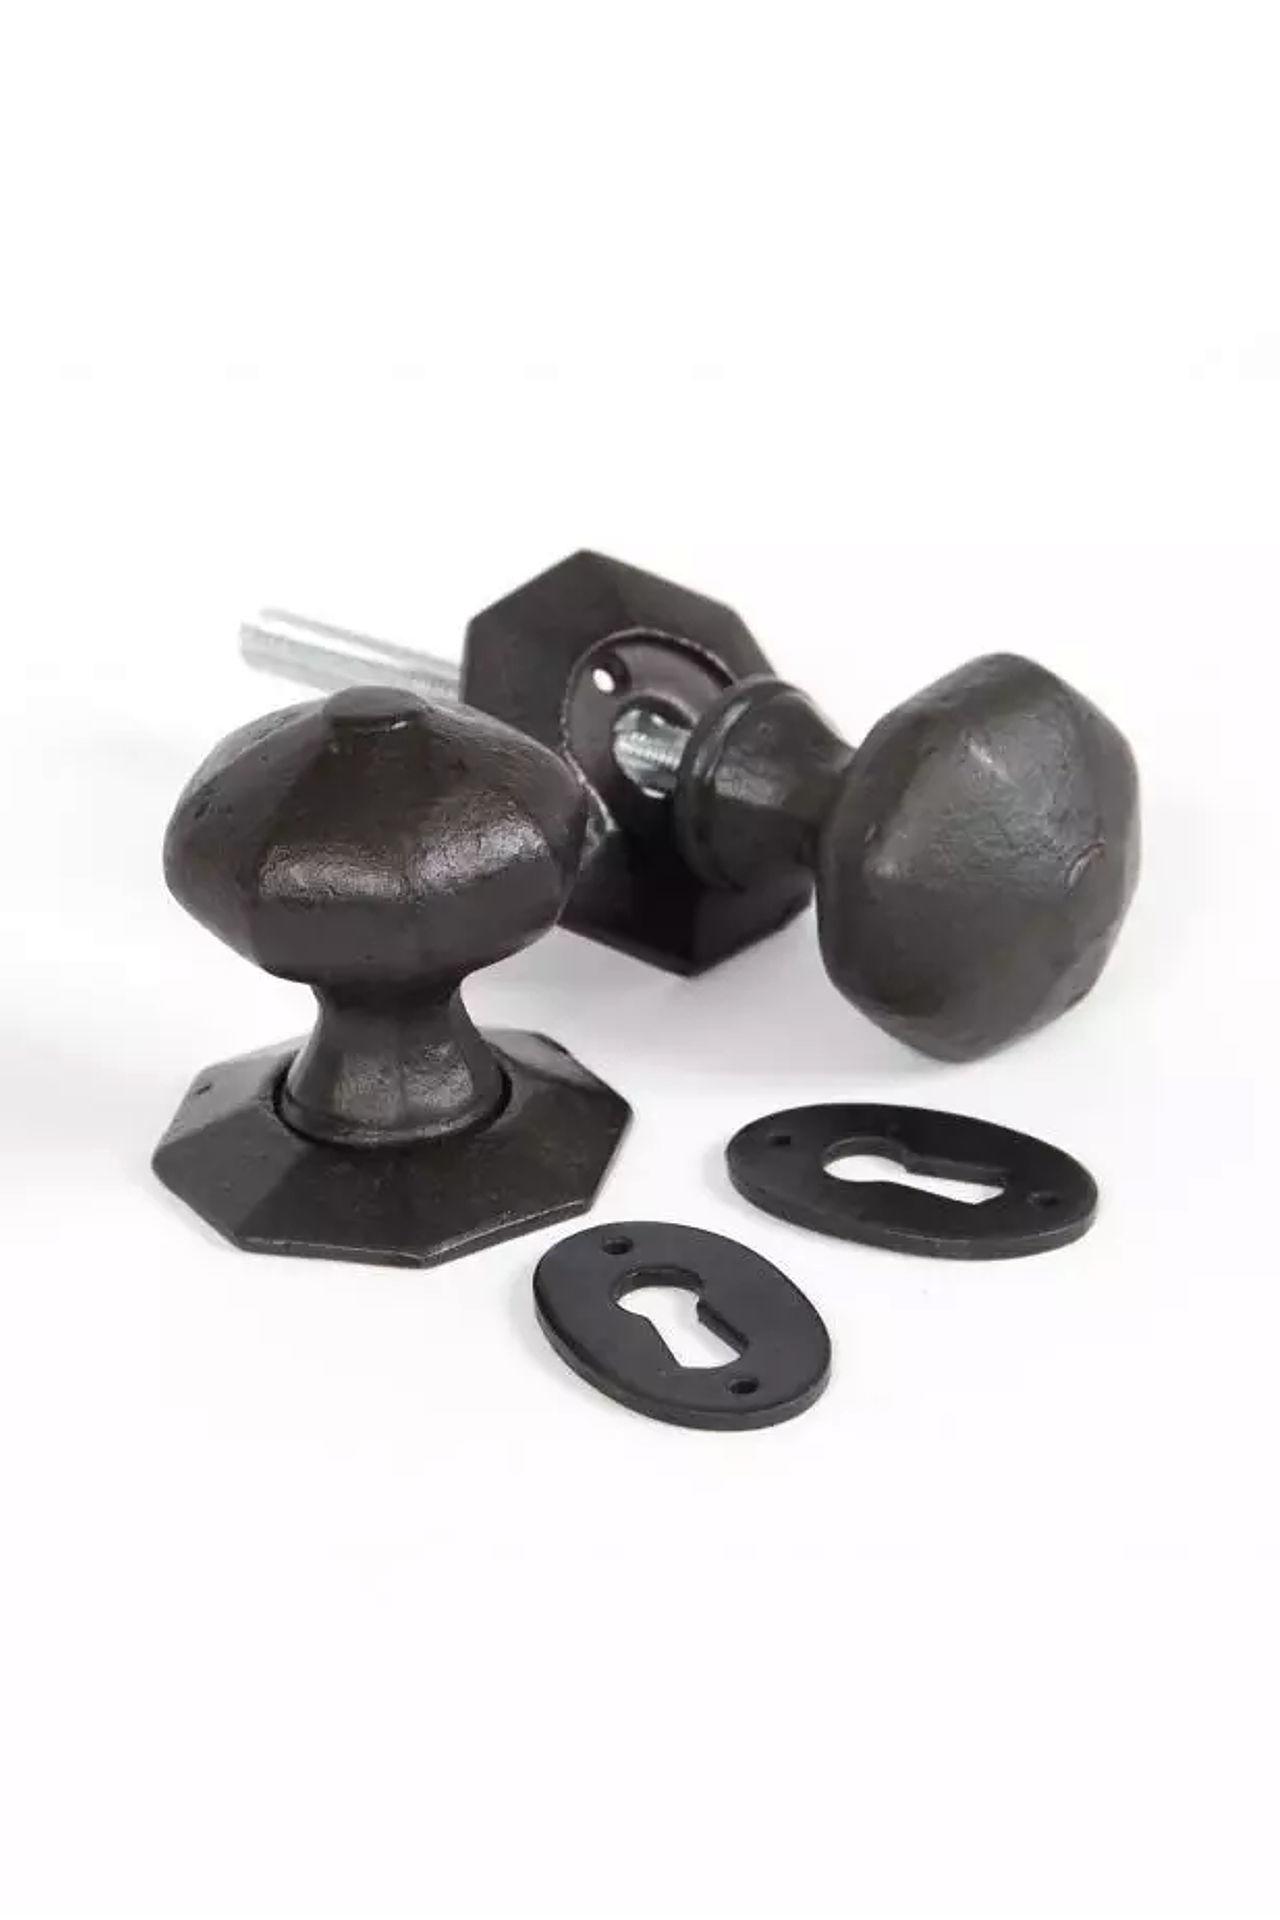 NEW From The Anvil Beeswax Octagonal Mortice/Rim Knob Set